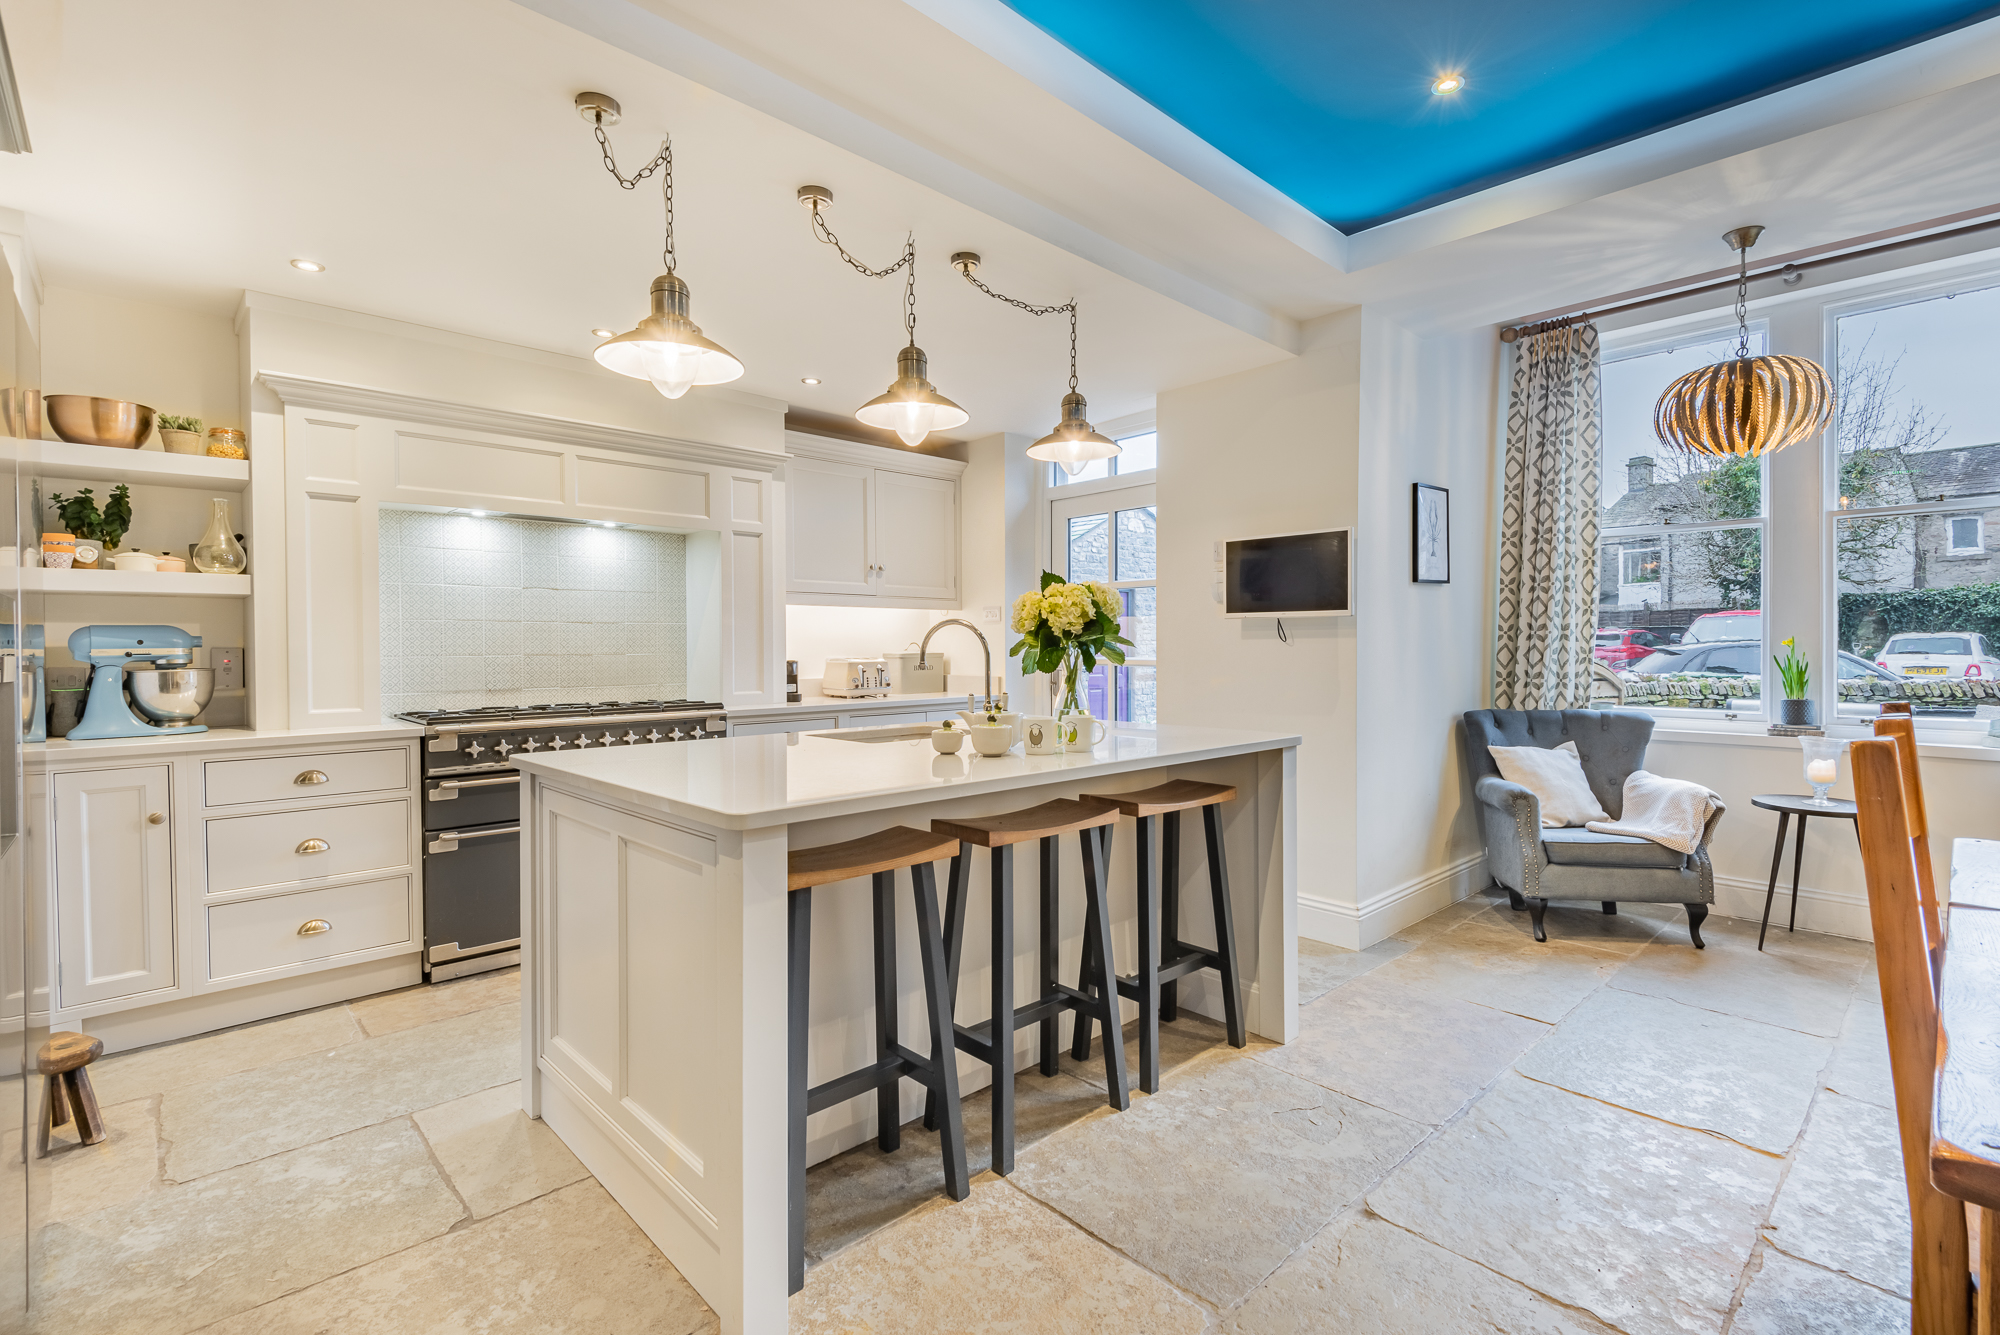 Kitchen extensions often add value to Yorkshire homes